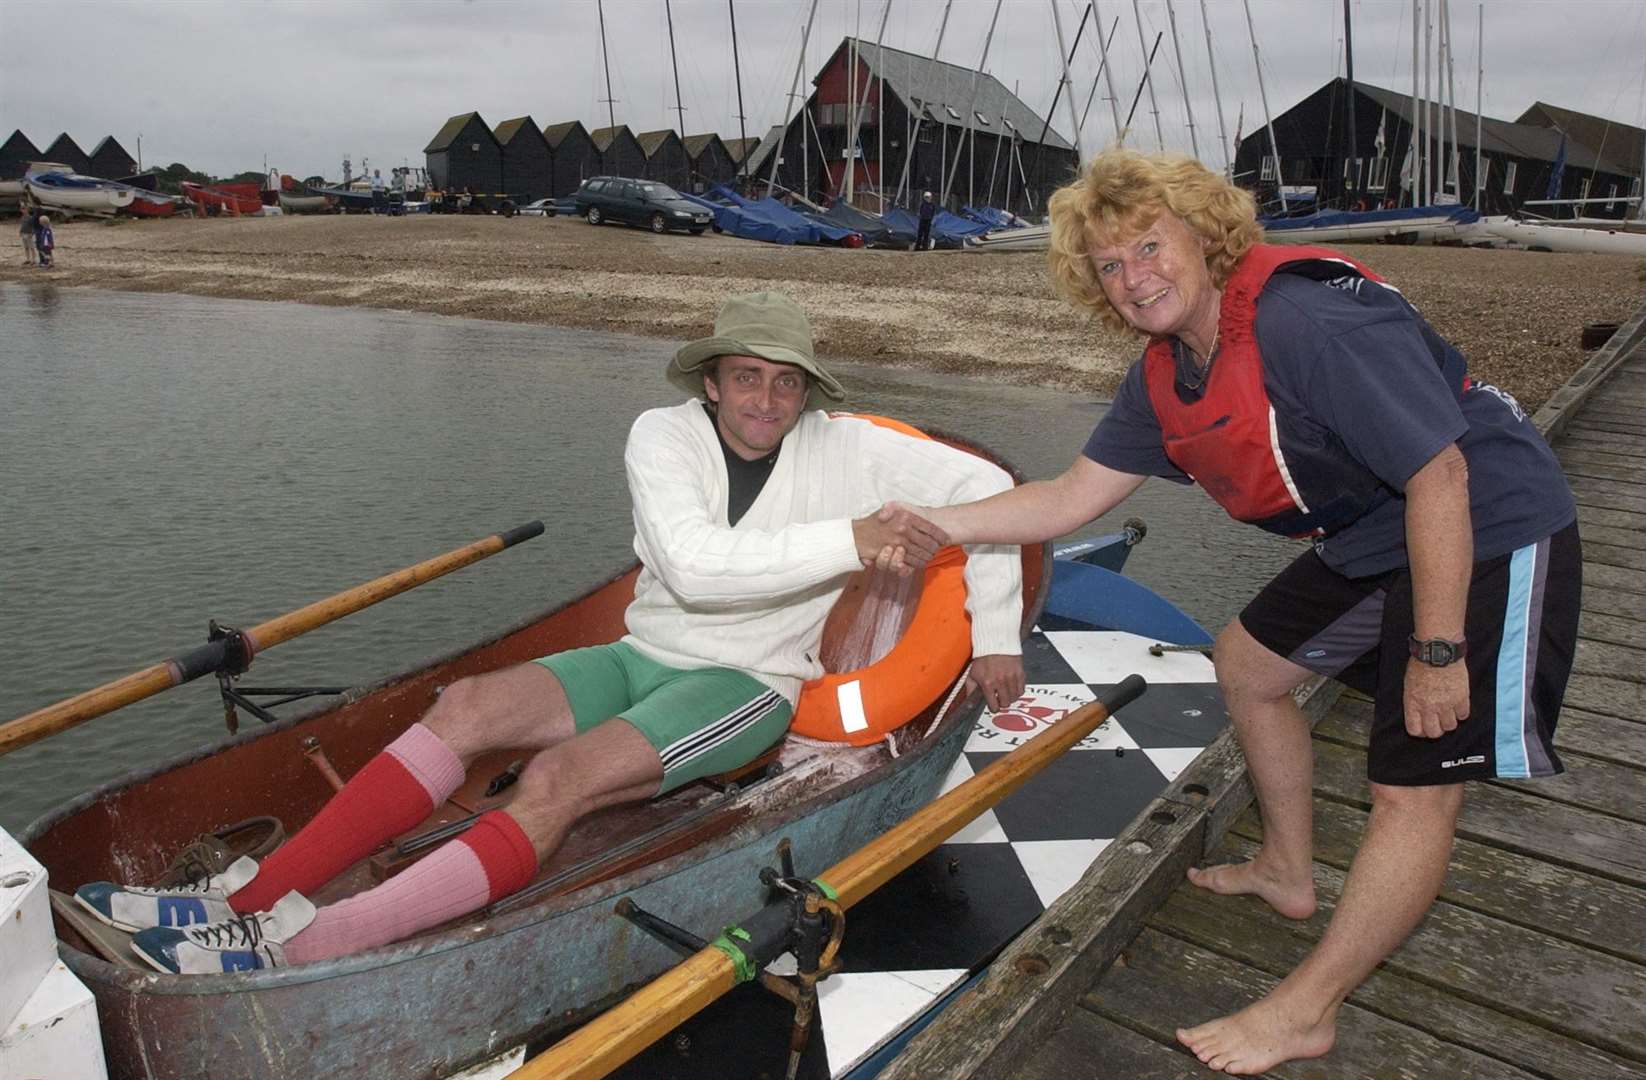 Tim Fitzhigham meets Wendy Fitzpatrick after rowing his bathtub to Whitstable en route to London